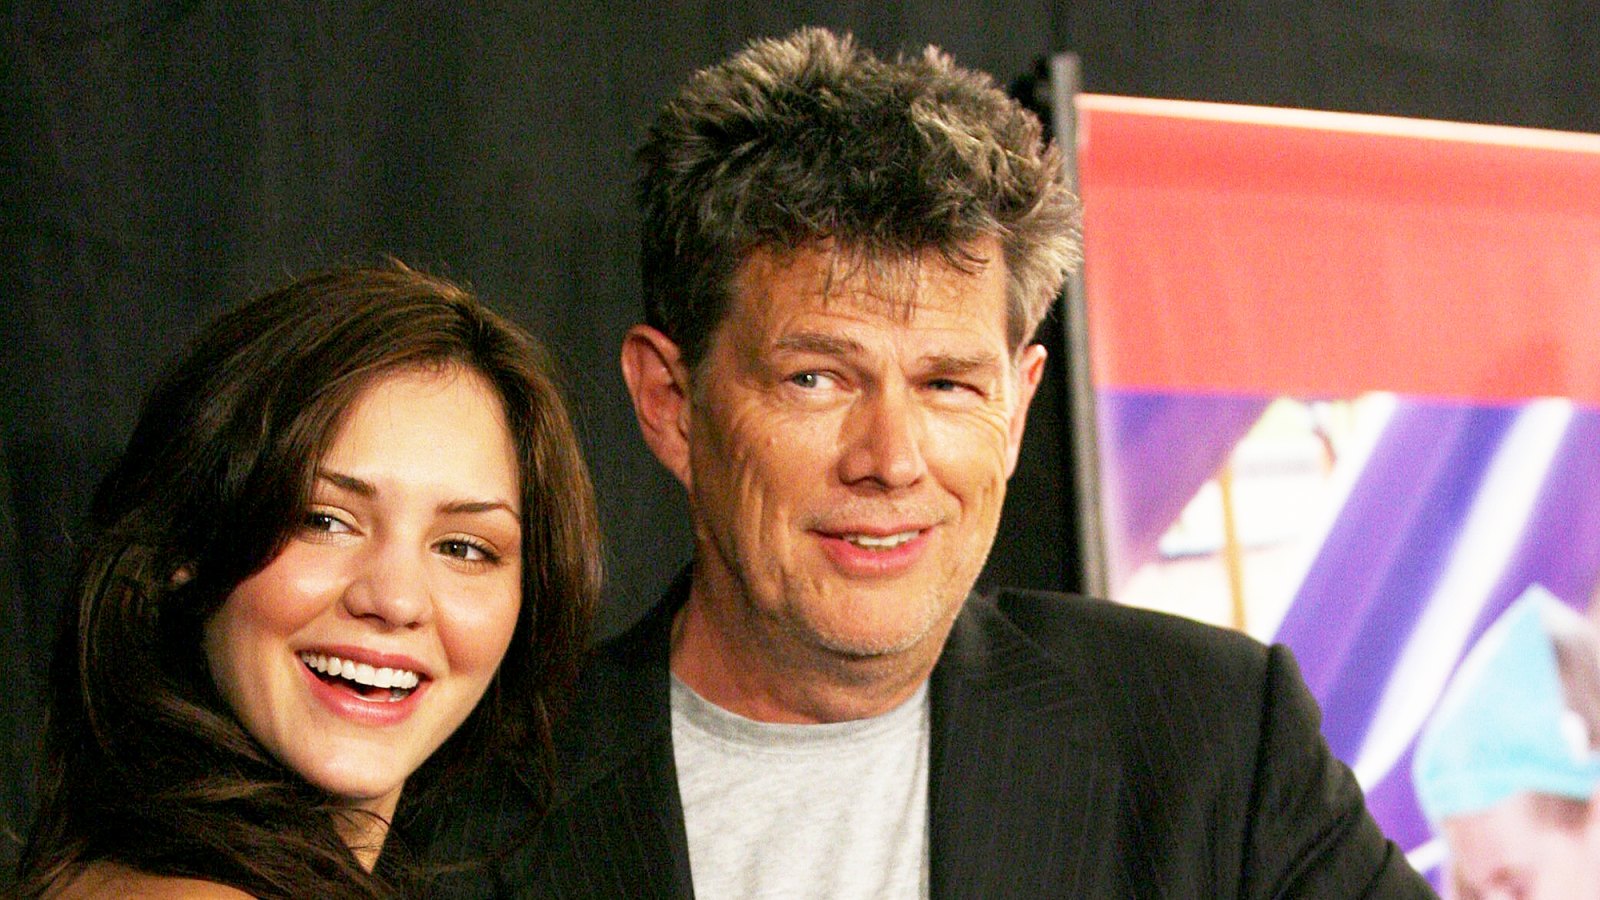 Katharine McPhee and David Foster during the 2006 JC Penny Jam press conference at the Shrine Auditorium in Los Angeles, California.